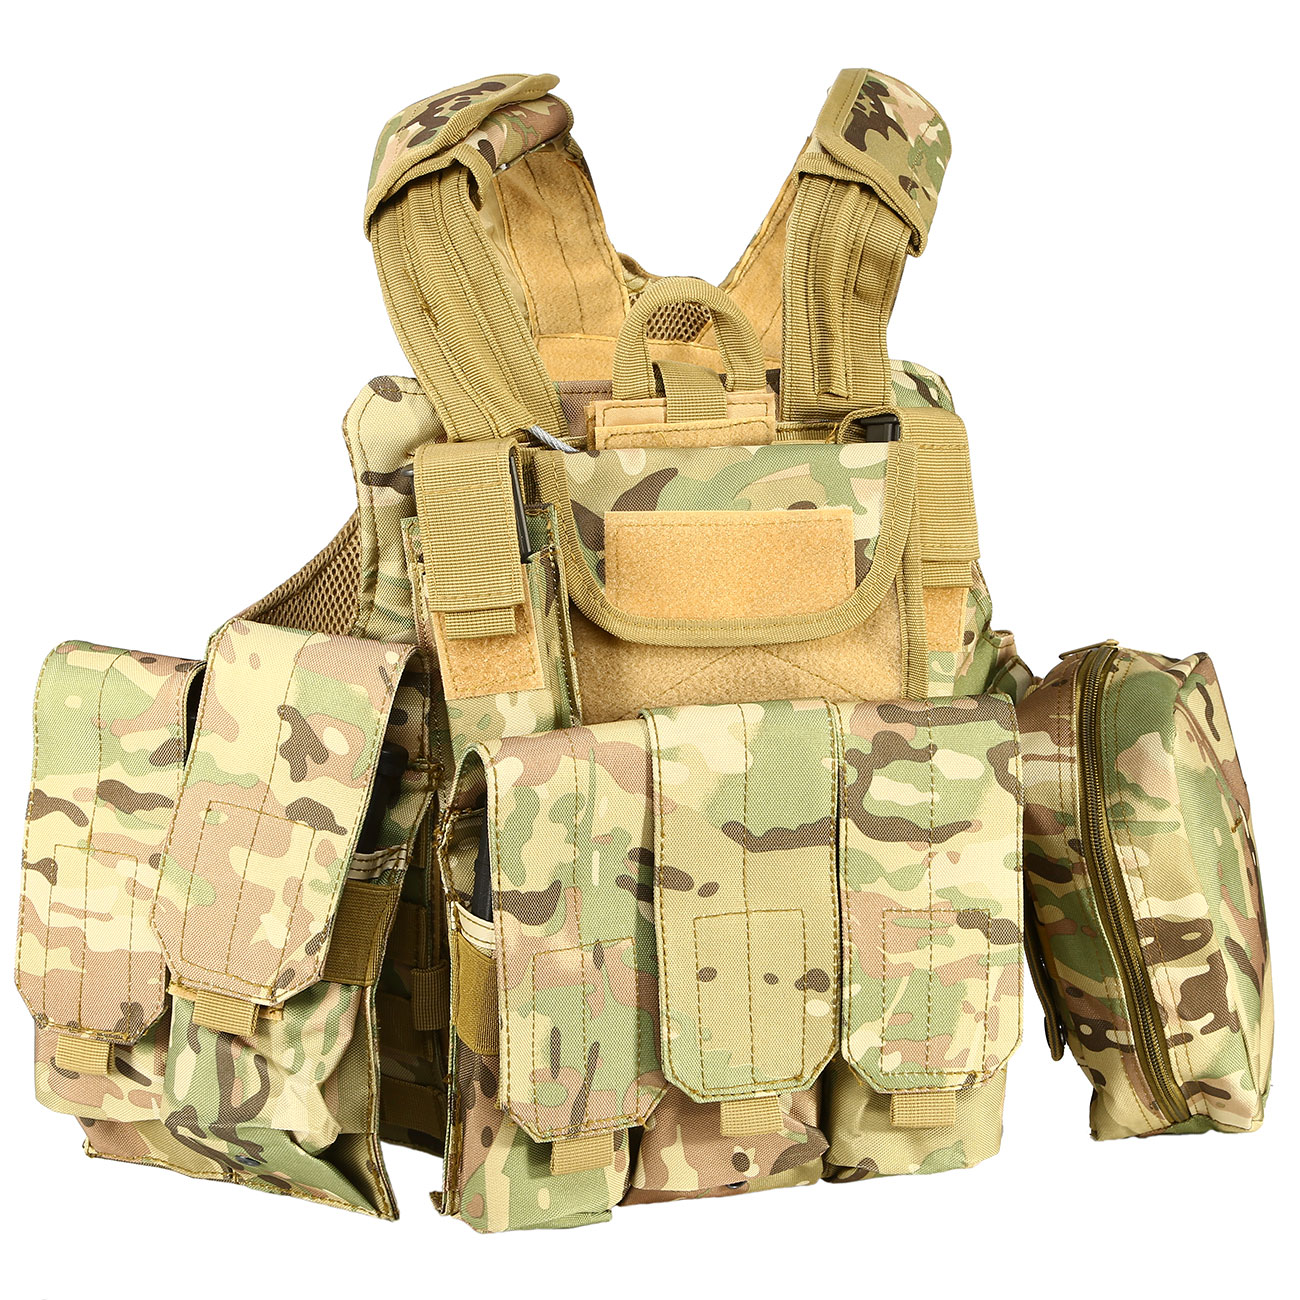 MOLLE Vest Paintball Tactical Military Vest mit Multicam-Muster Military Camo Chest Rig Tactical Vest für Airsoft Verstellbare leichte Kampfweste DIGITAL Jungle Camouflage